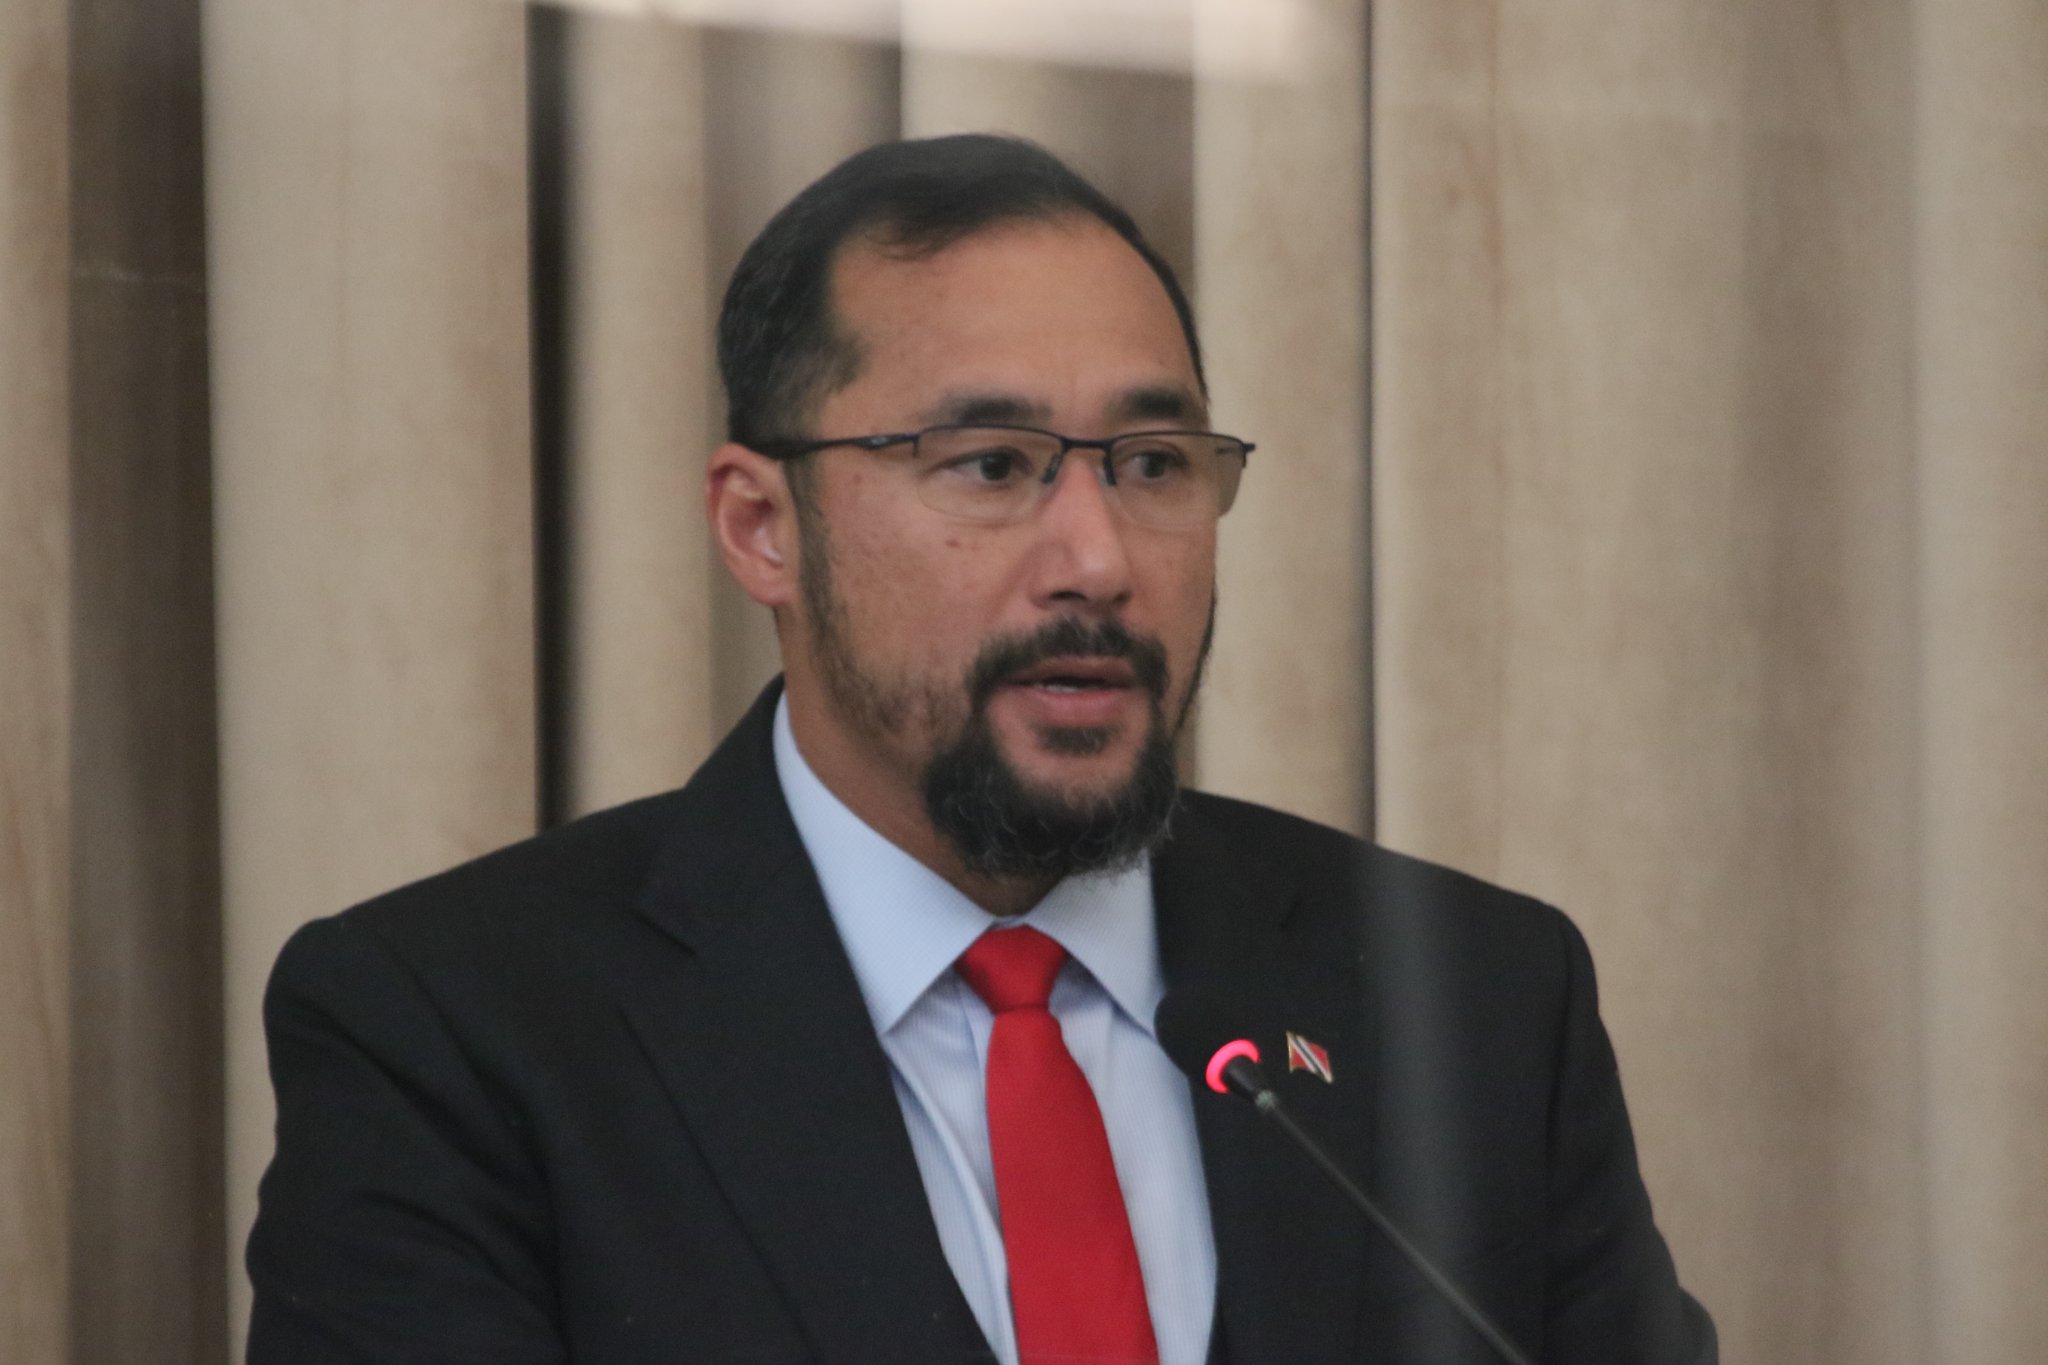 Young: TT gained almost $11 billion in revenues between 2016 and 2021 because of PNM measures